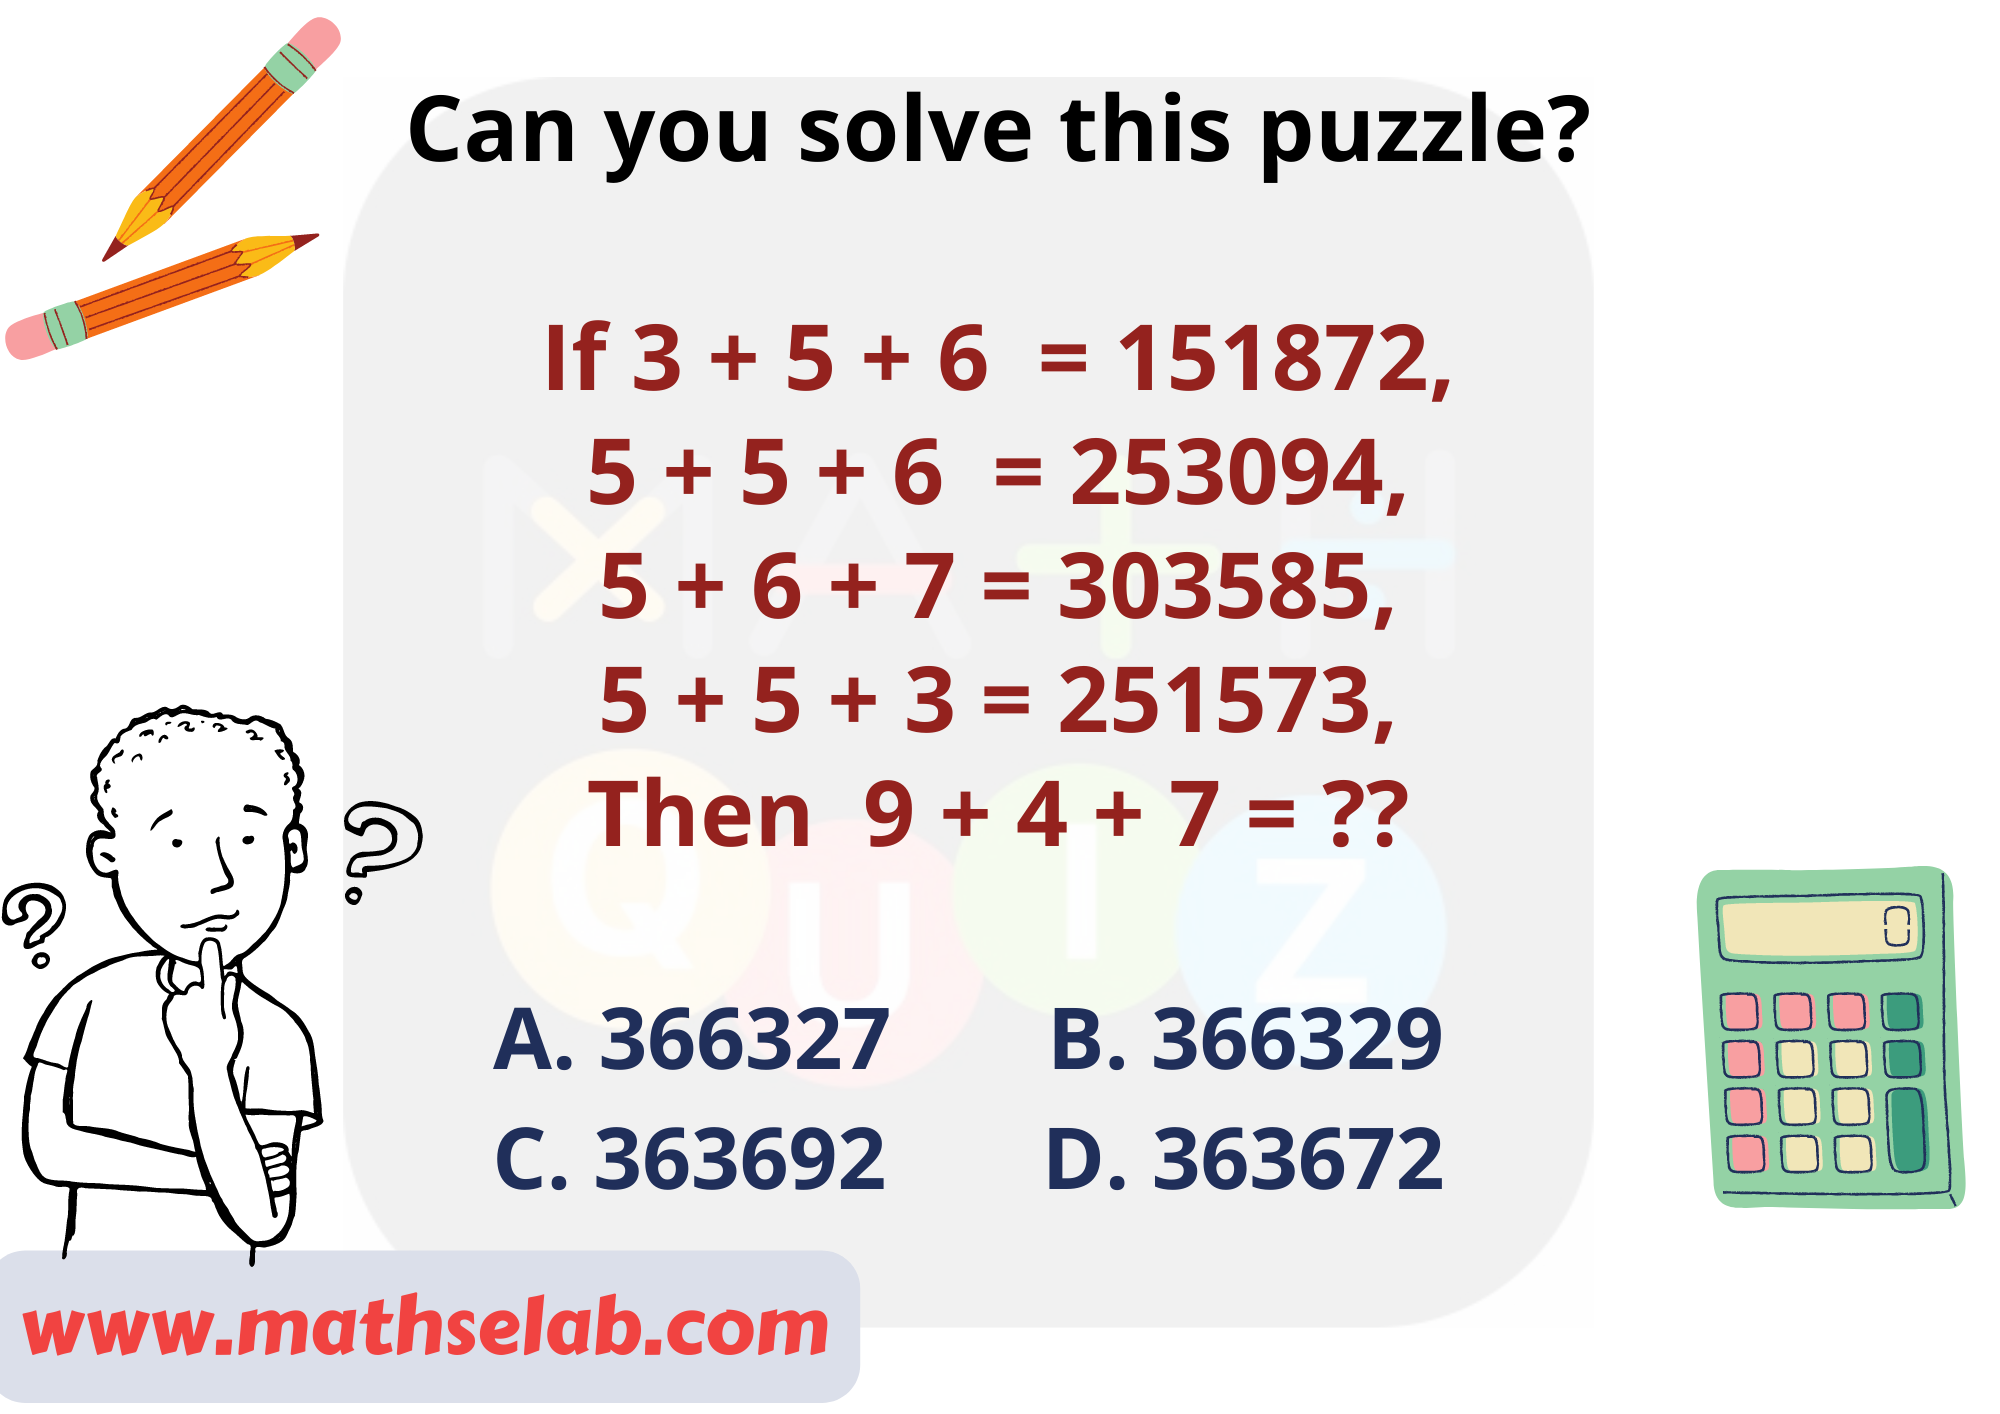 Can you solve this puzzle? If 3 + 5 + 6  = 151872, 5 + 5 + 6  = 253094, 5 + 6 + 7 = 303585, 5 + 5 + 3 = 251573, Then 9 + 4 + 7 = ??